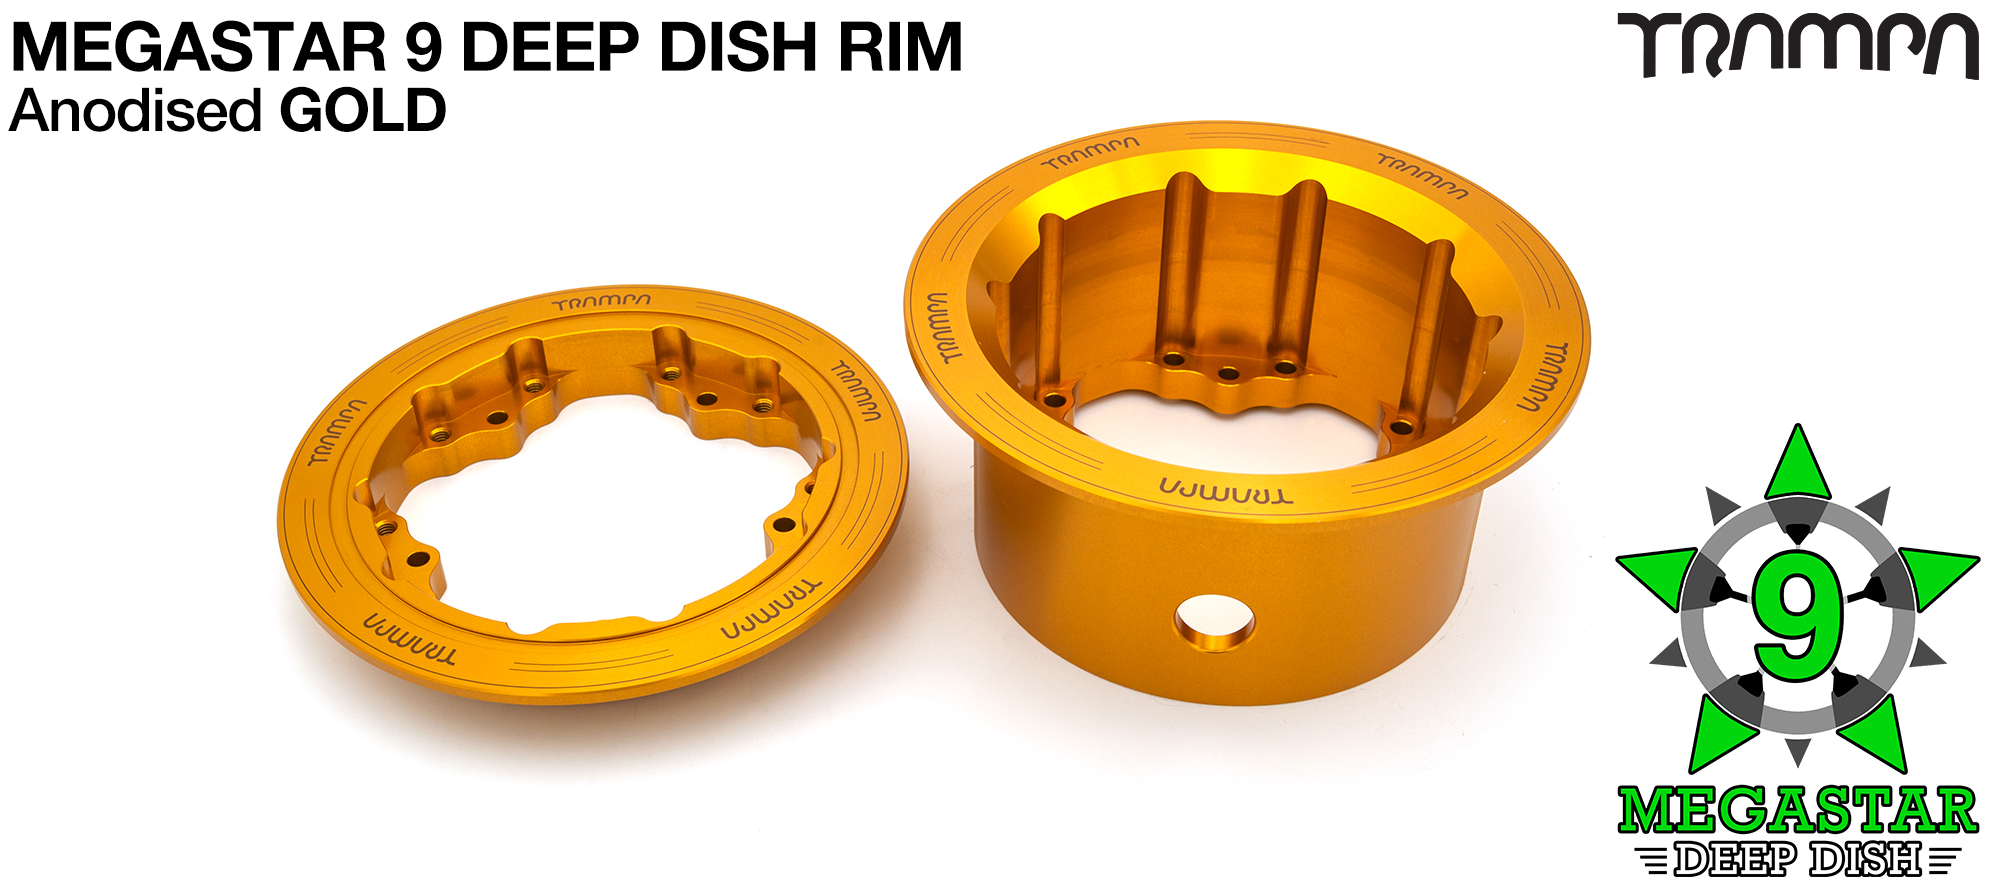 MEGASTAR 9 DEEP-DISH Rims Measure 3.75/4x 3 Inch. The Bearings are positioned OFF-SET & accept 4 Inch Rim Tyres to make 9 or 10 inch Wheels - GOLD